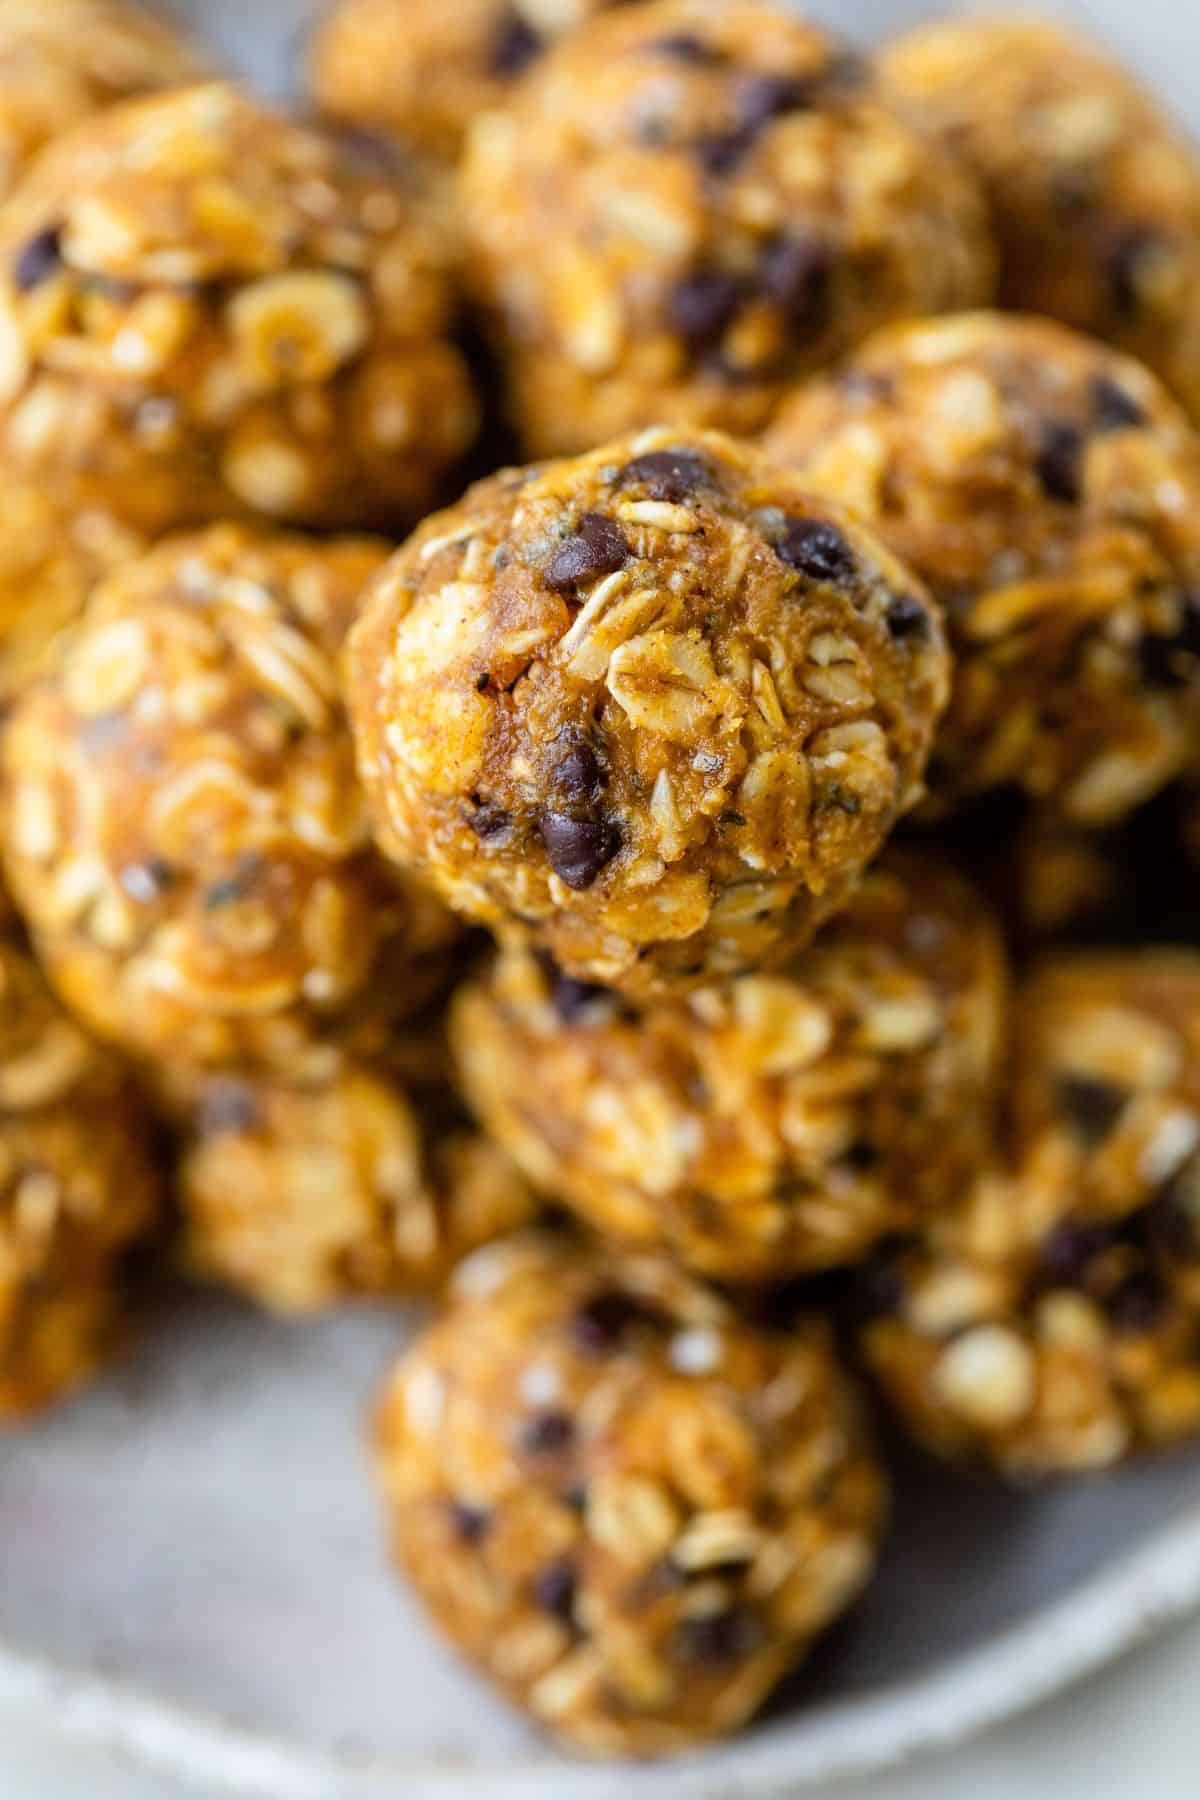 pumpkin energy balls made with chocolate chips